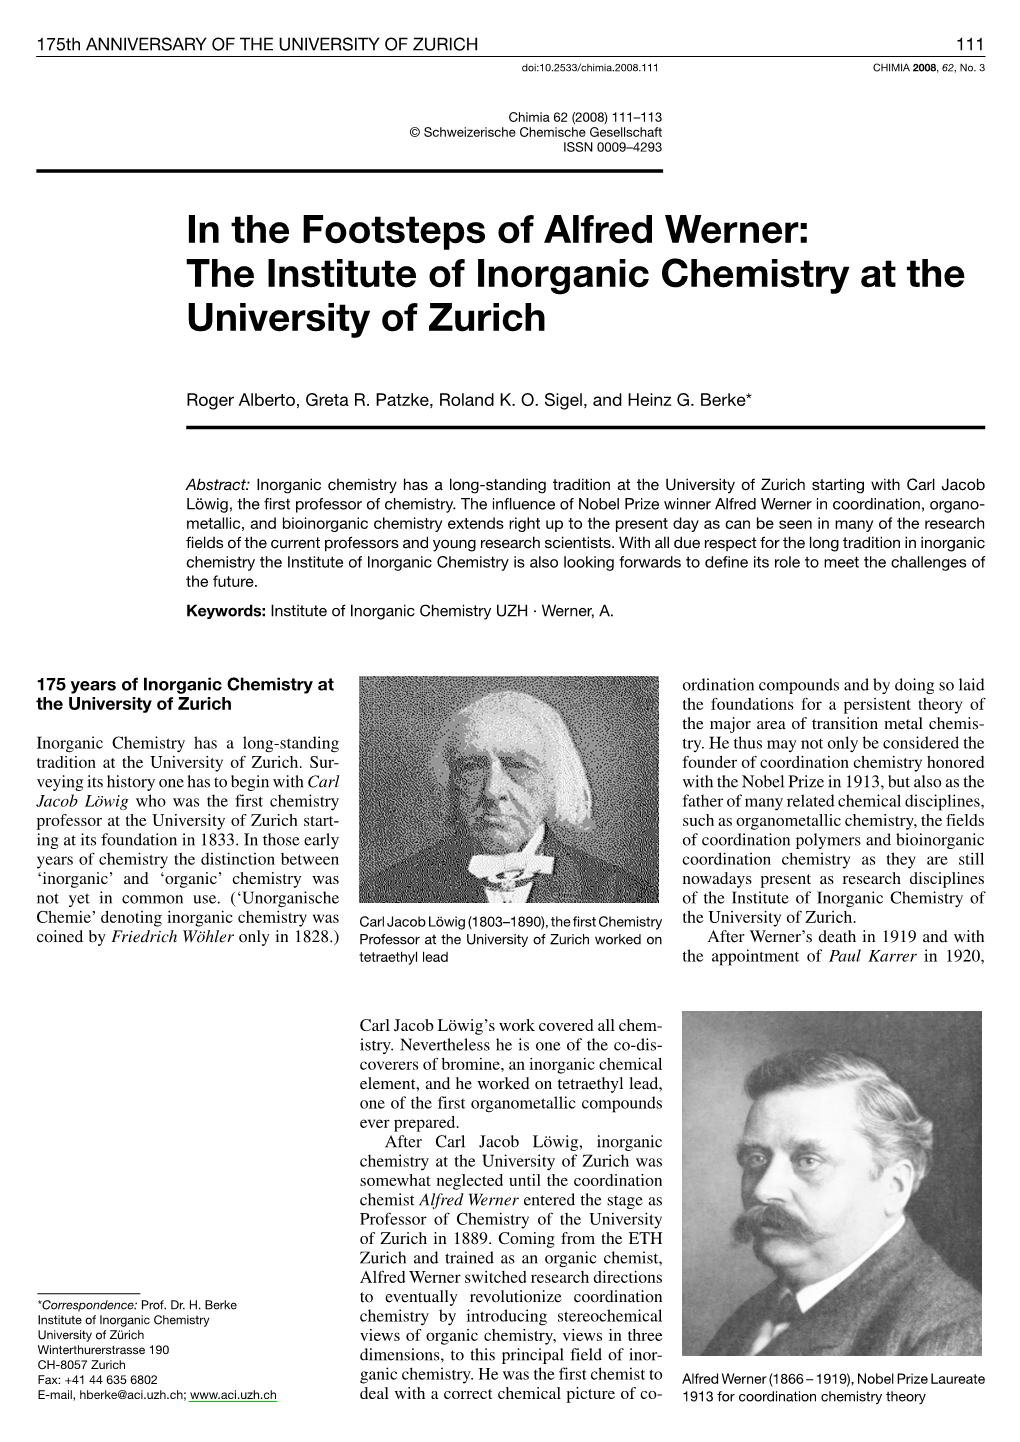 In the Footsteps of Alfred Werner: the Institute of Inorganic Chemistry at the University of Zurich